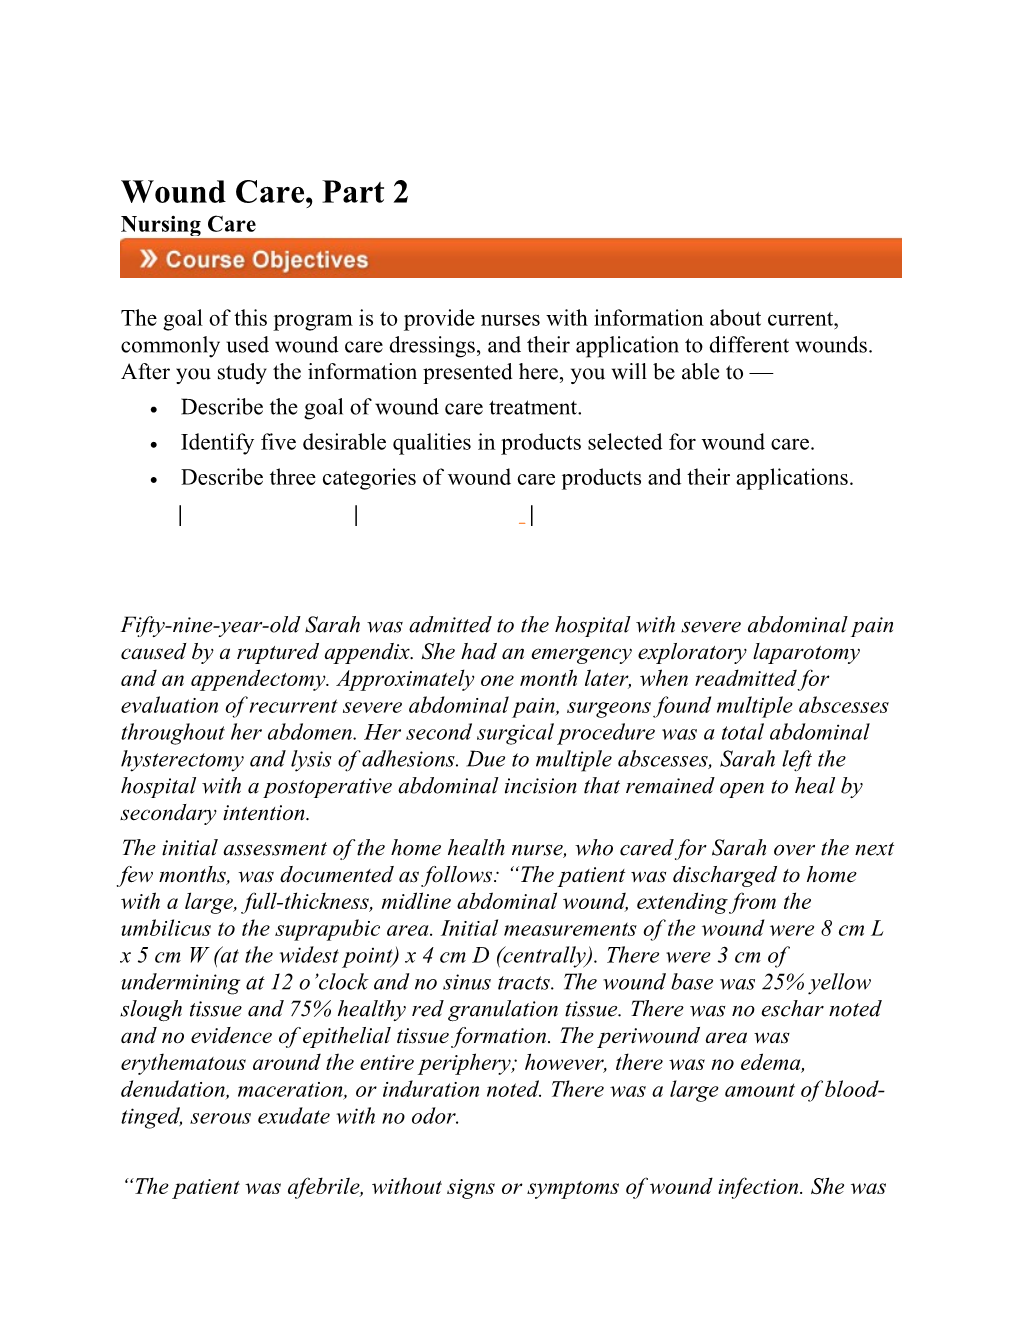 Describe the Goal of Wound Care Treatment